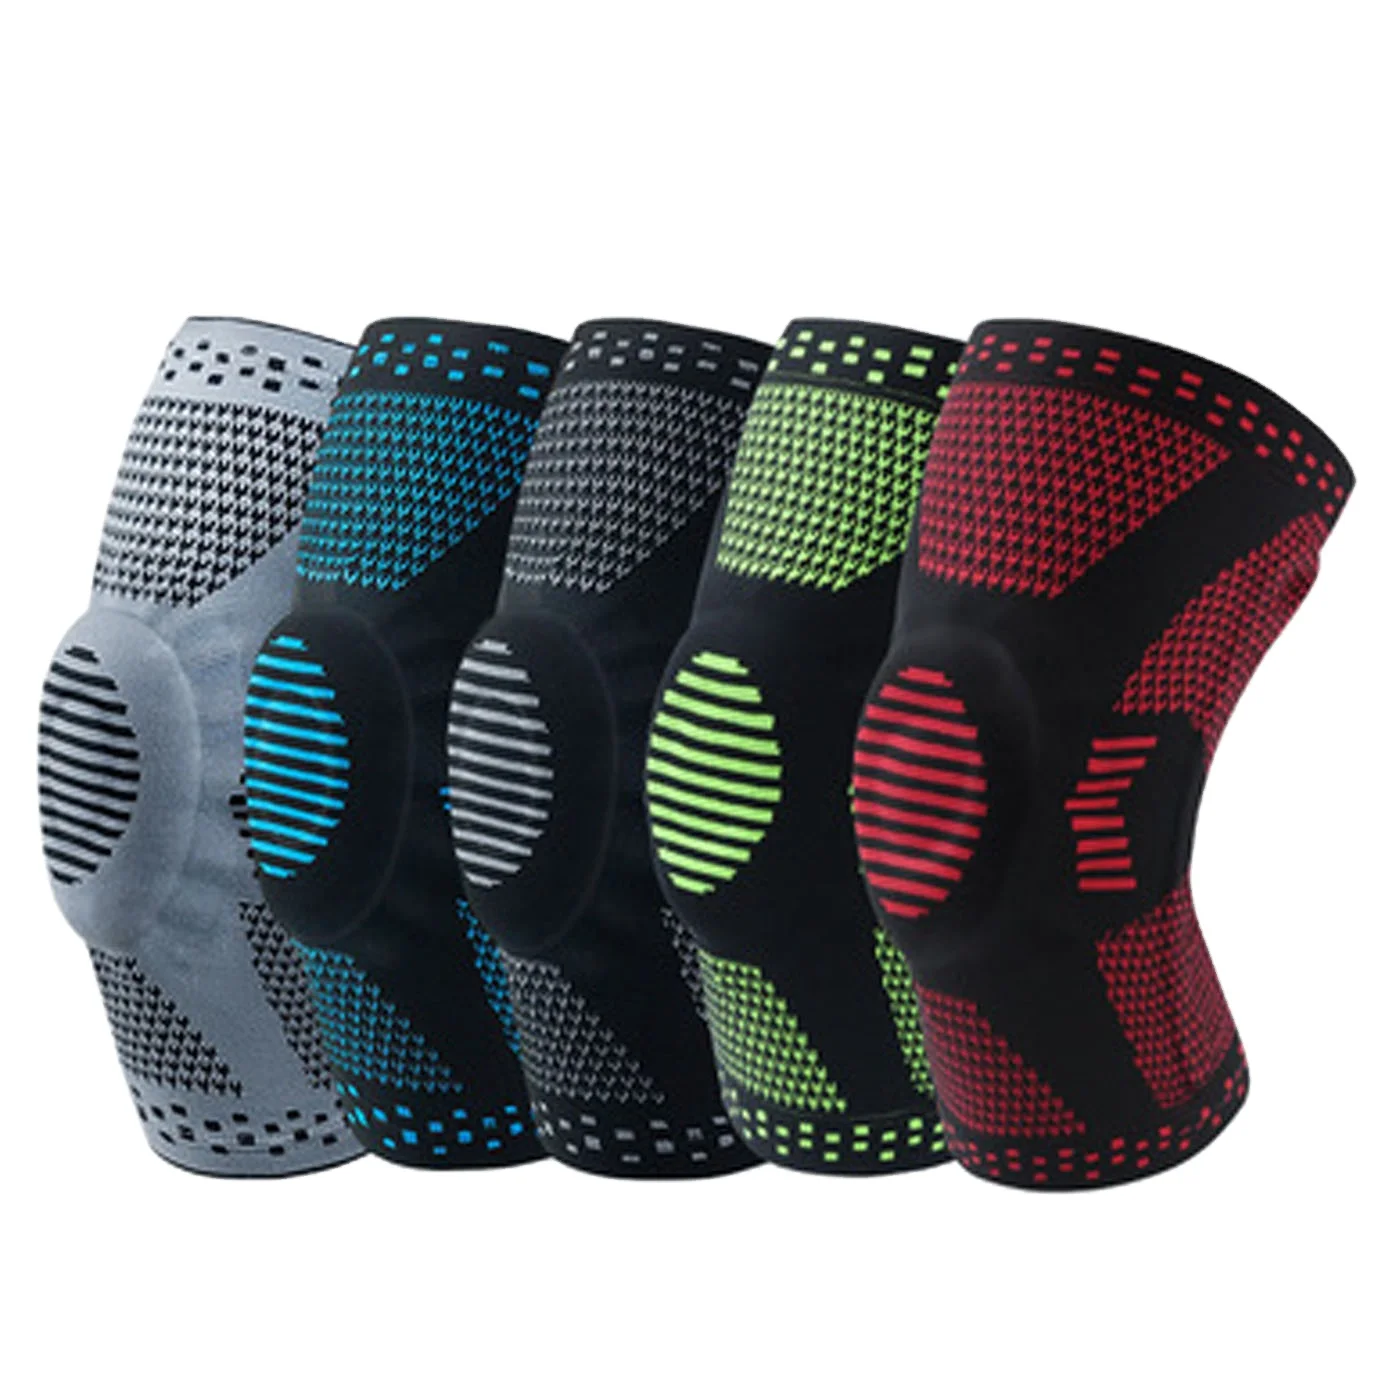 

Adjustable Knee Brace Sleeve Gel Pad Compression Sleeve Custom Logo Knee Silicon Support High Quality Knee Braces, Red/green/gray/blue/black